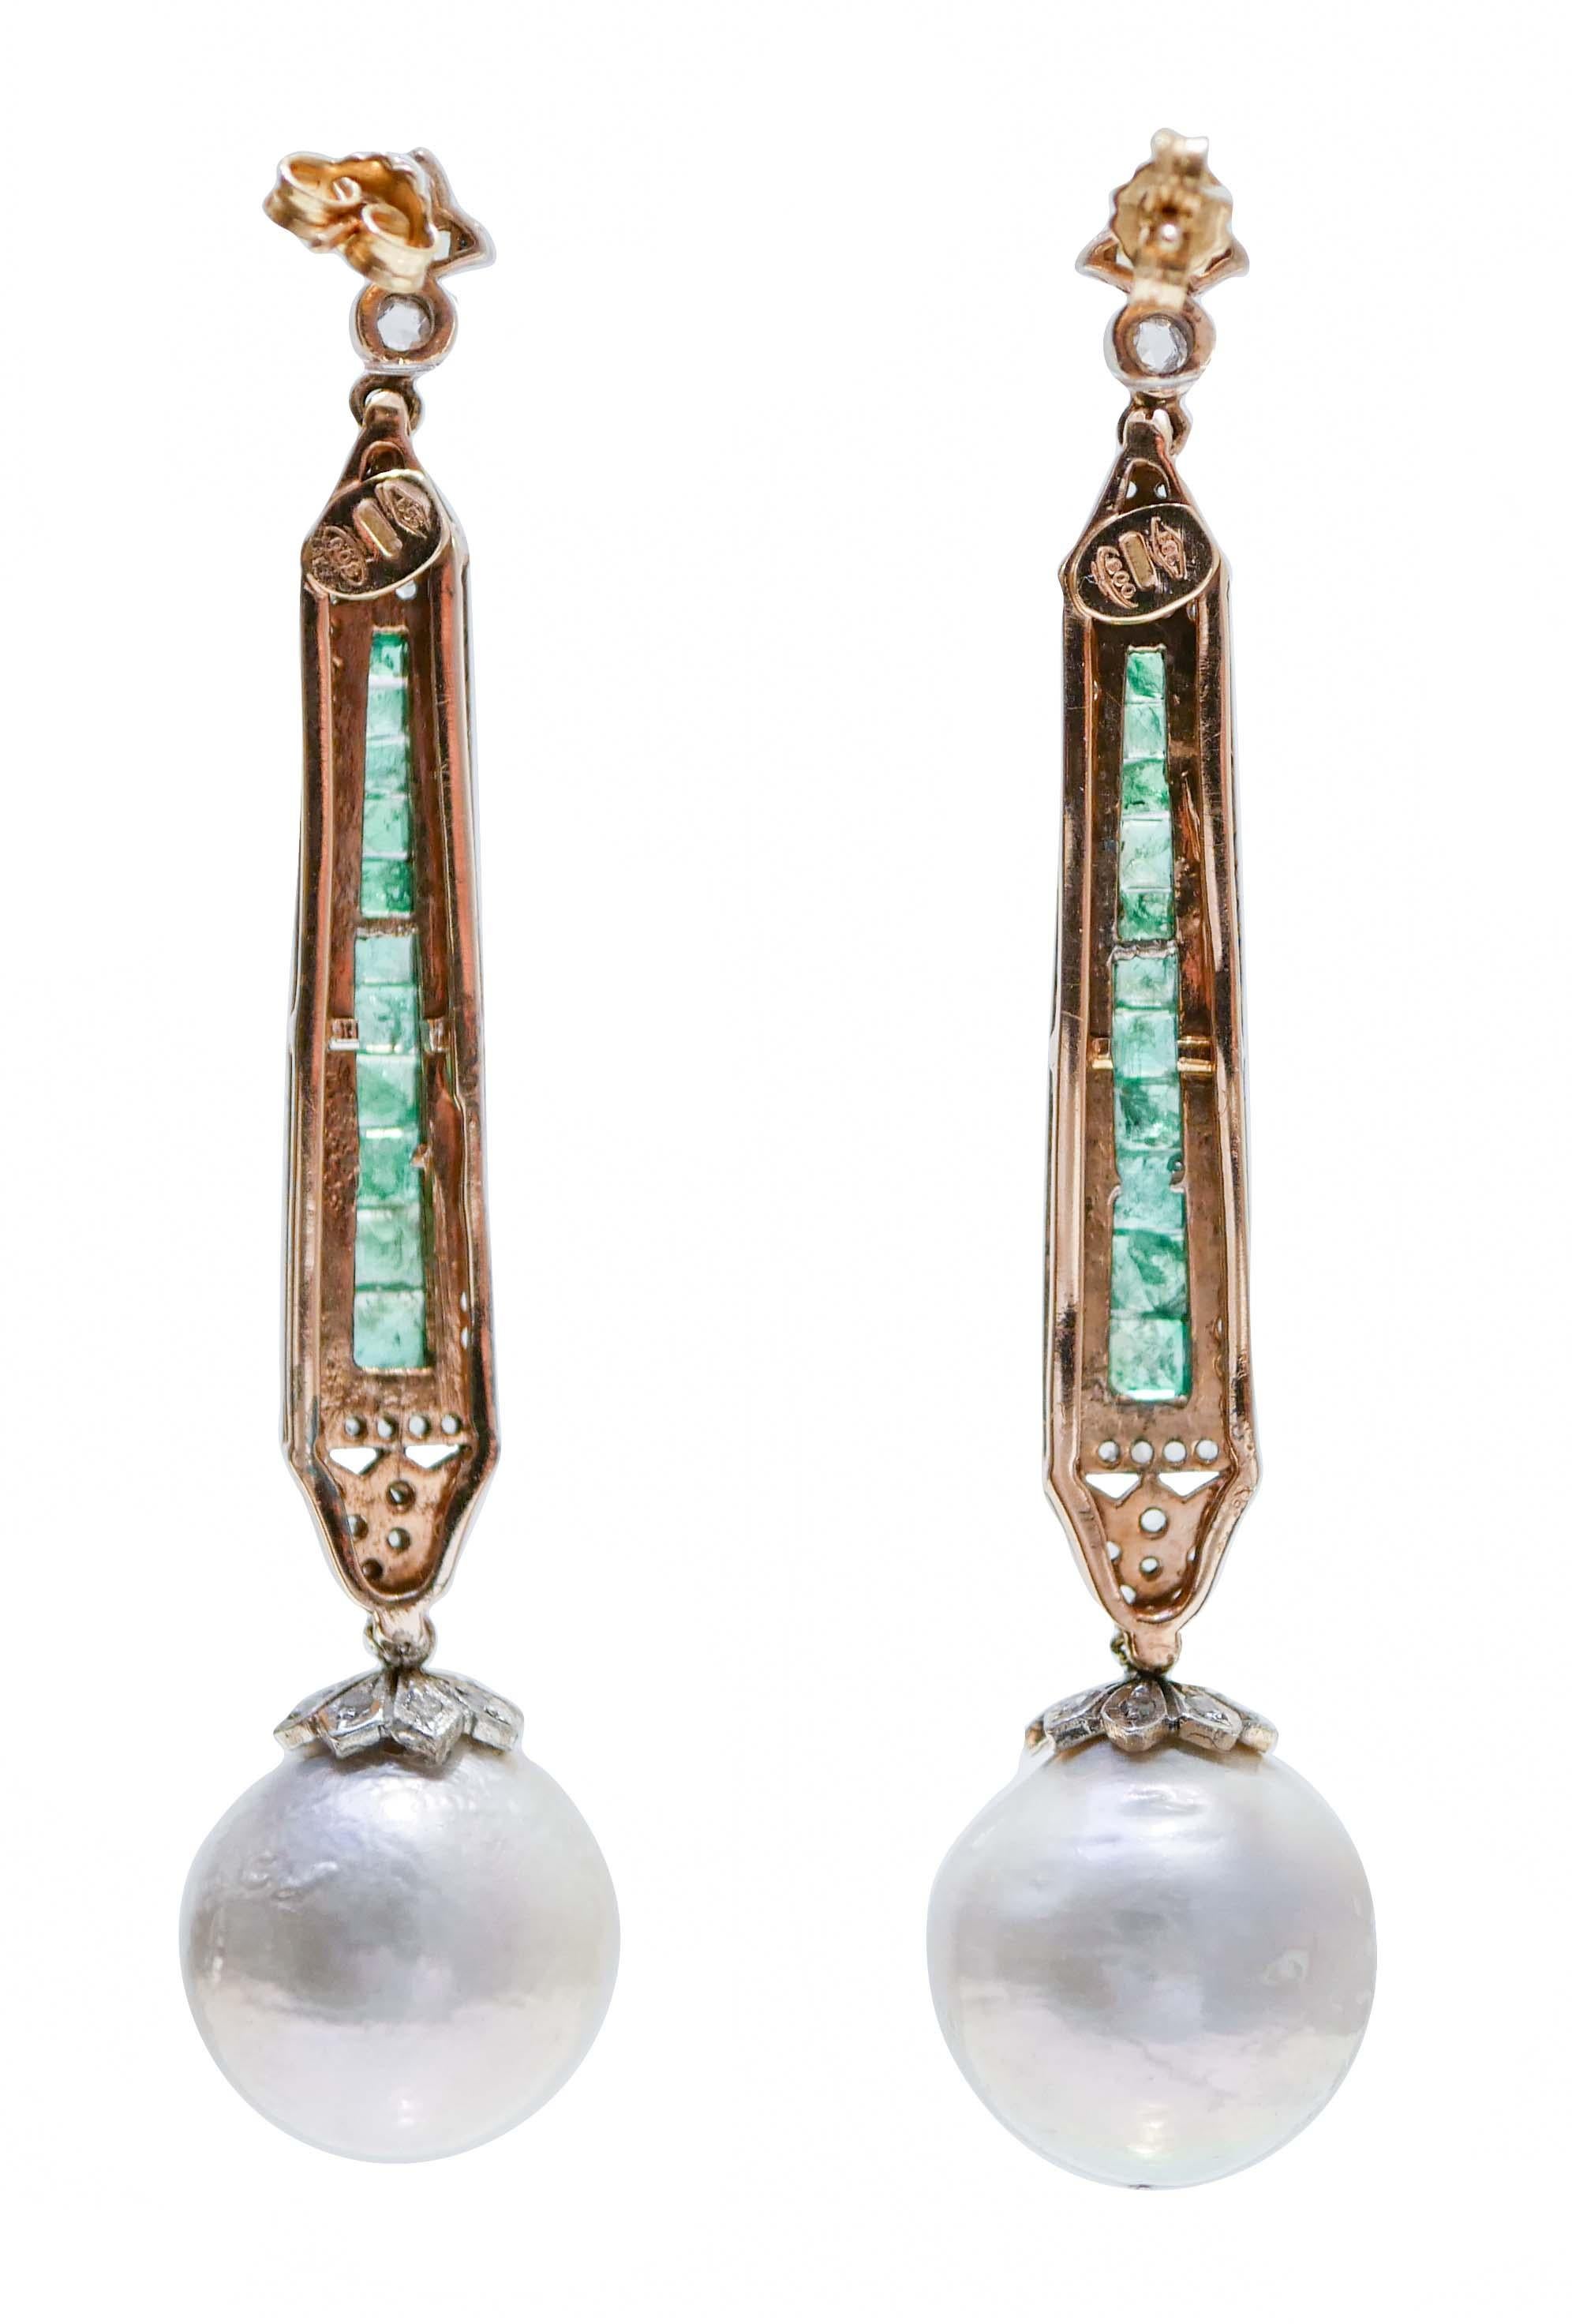 Retro Grey Pearls, Emeralds, Diamonds, 14 Karat Rose Gold and Silver Earrings. For Sale